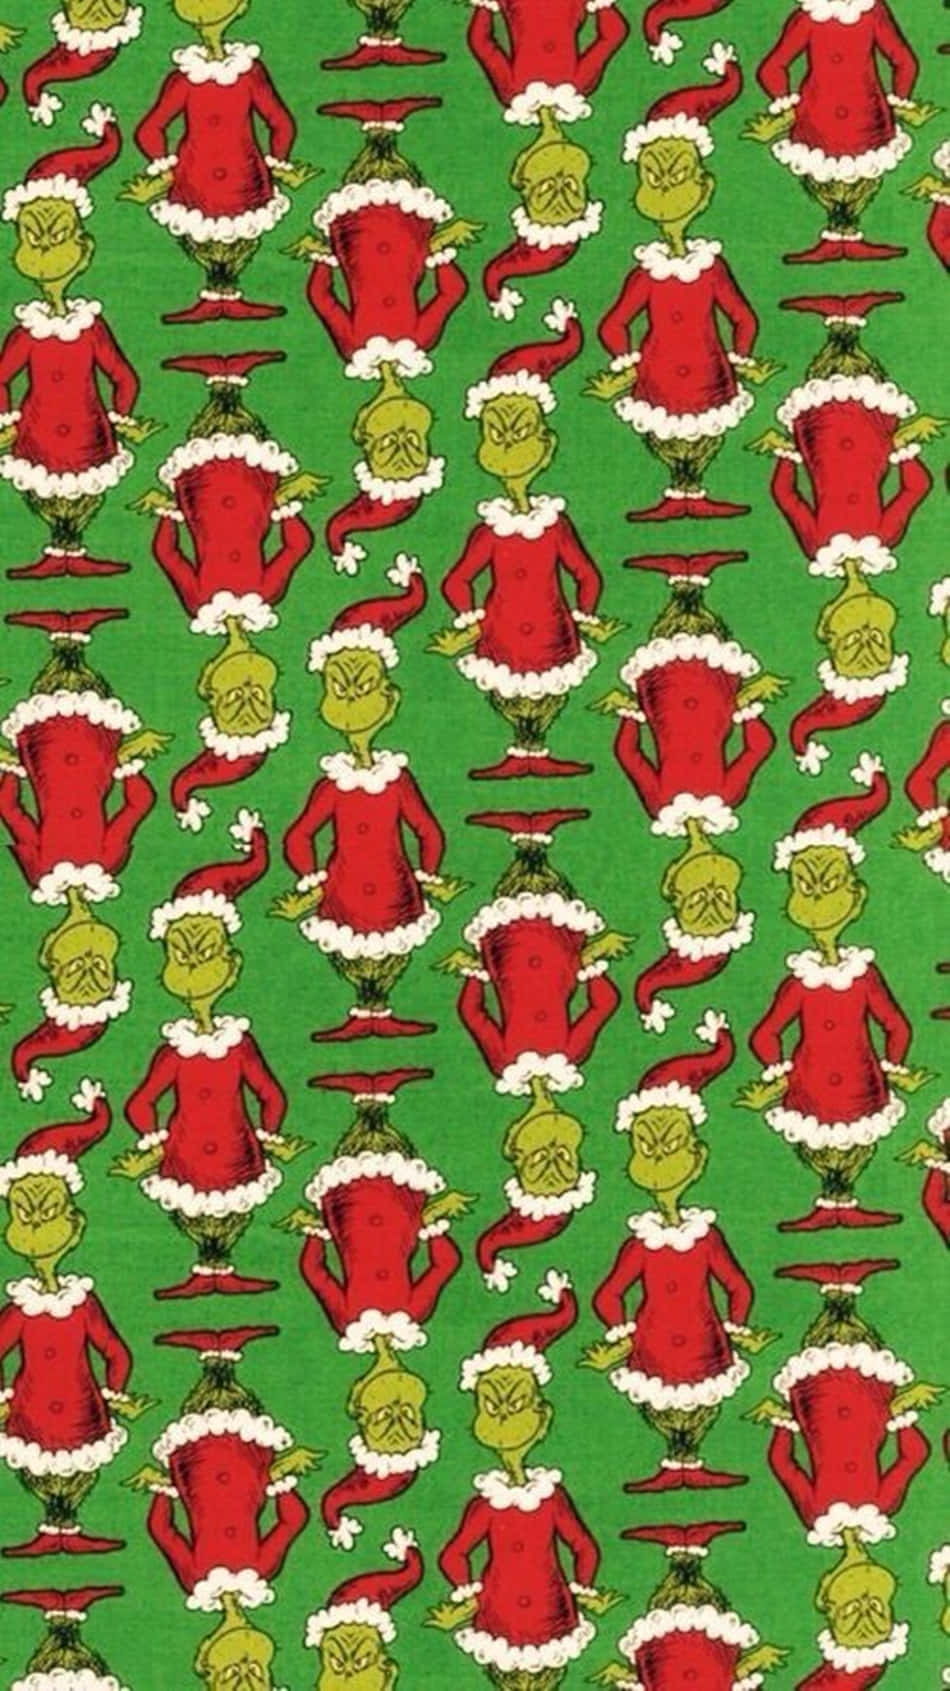 Spread Christmas Cheer This Holiday Season With Grinch Christmas Iphone Wallpaper